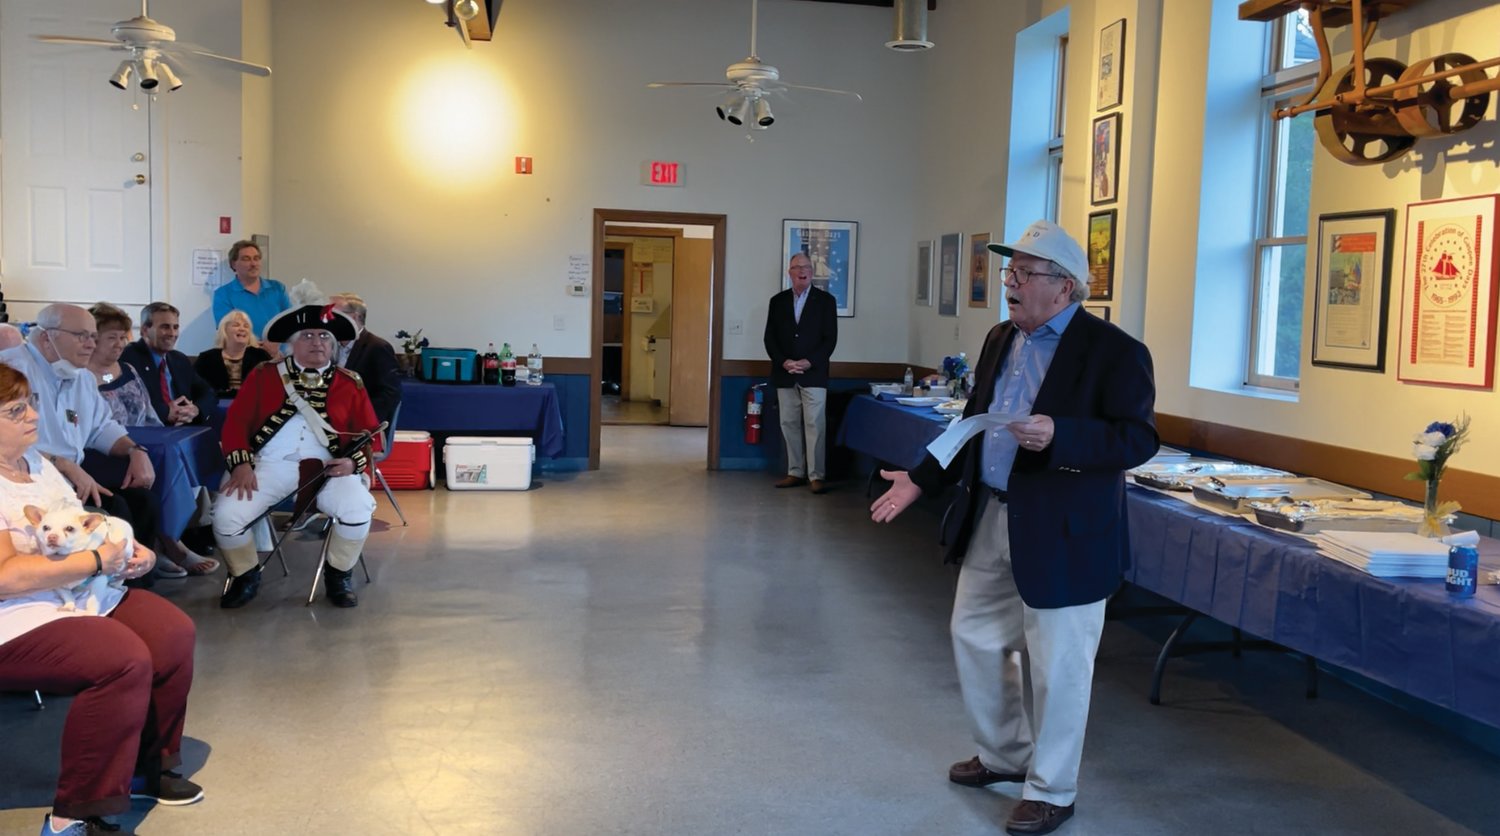 LEADING THE WAY: Mark Russell kicks off last week’s installation ceremony for the Gaspee Days Committee’s new officers. The formal event was followed by a dinner.